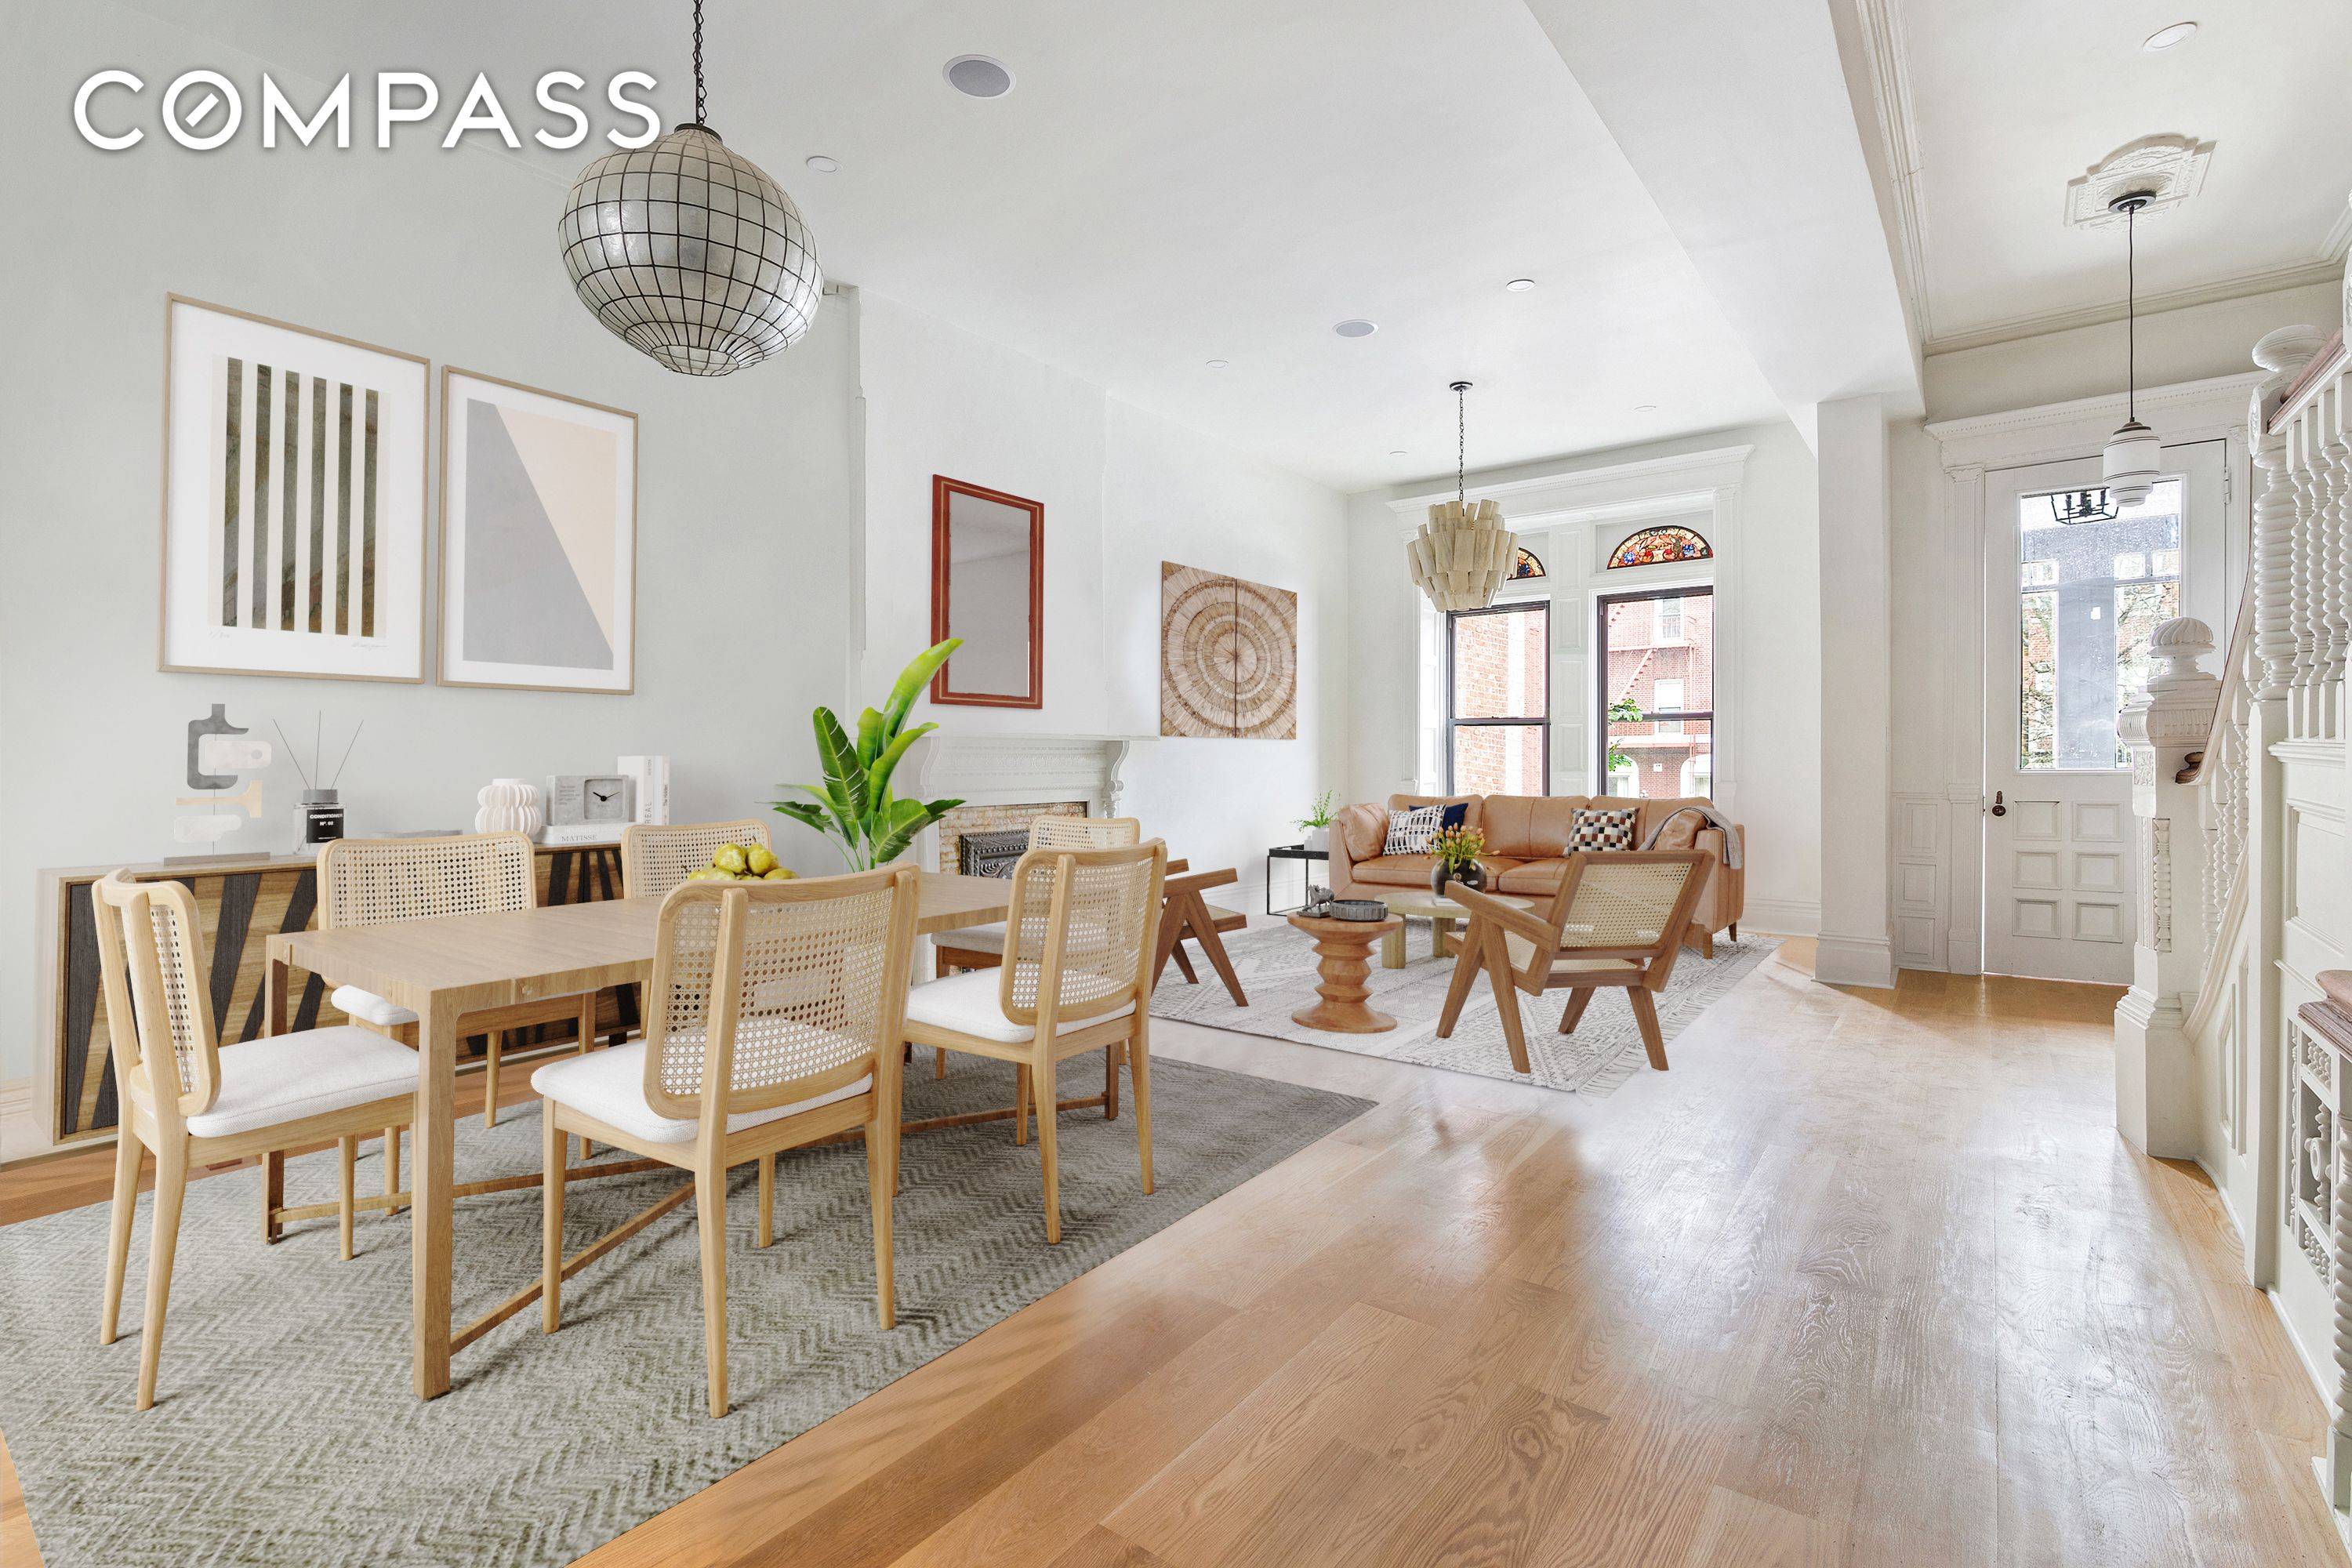 Introducing 1412 Pacific Street, a meticulously restored Crown Heights North residence dating back to 1901.